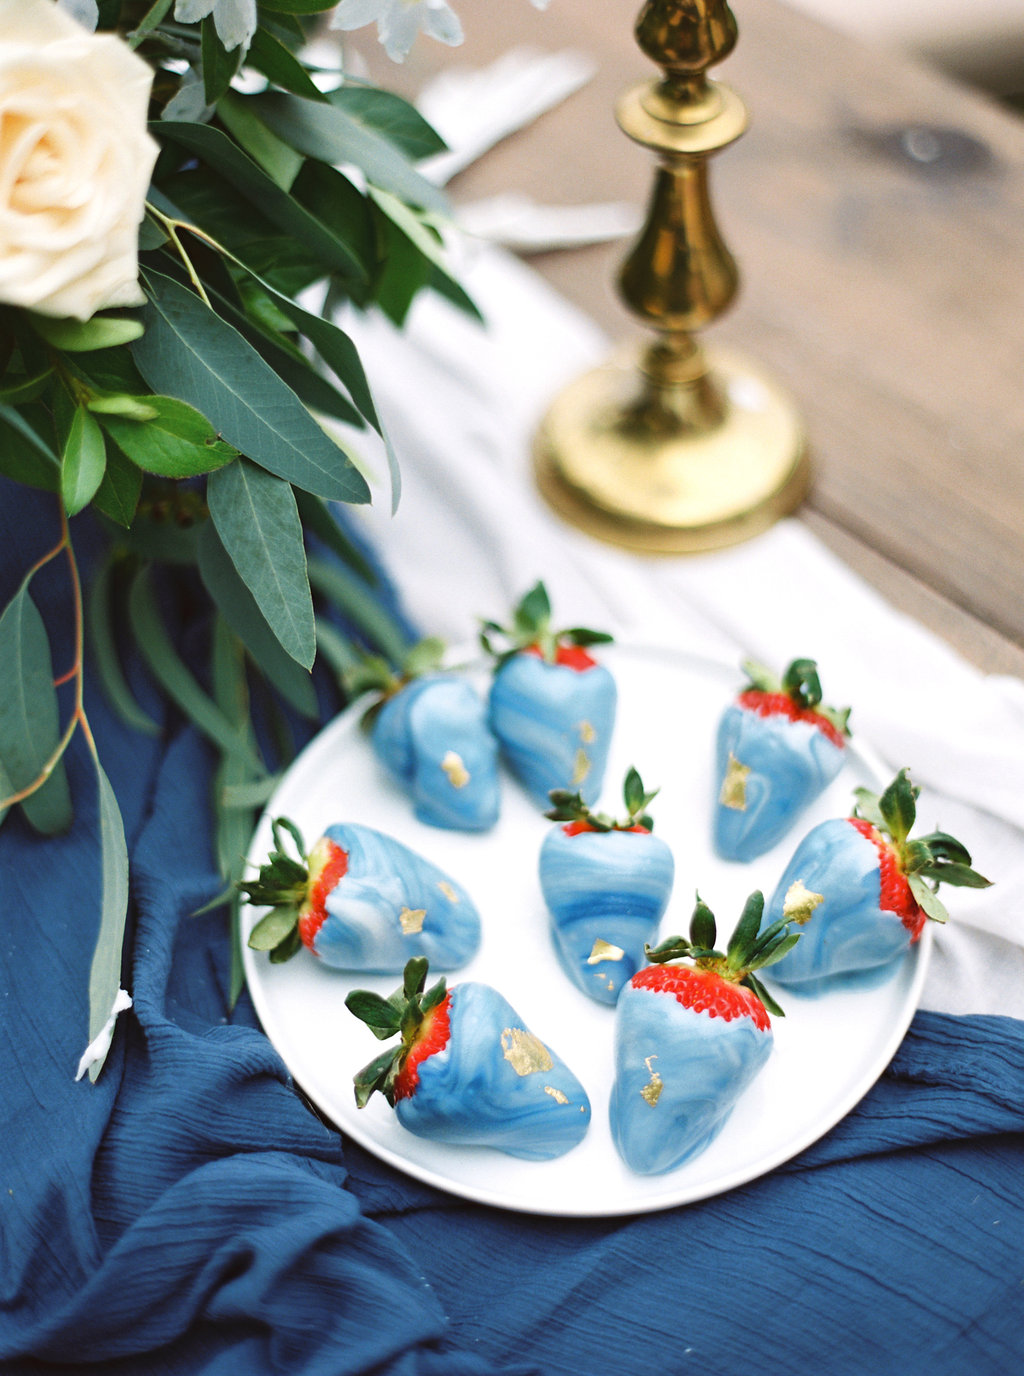 Blue Marbled Chocolate Strawberries| Credit: Courtney Leigh